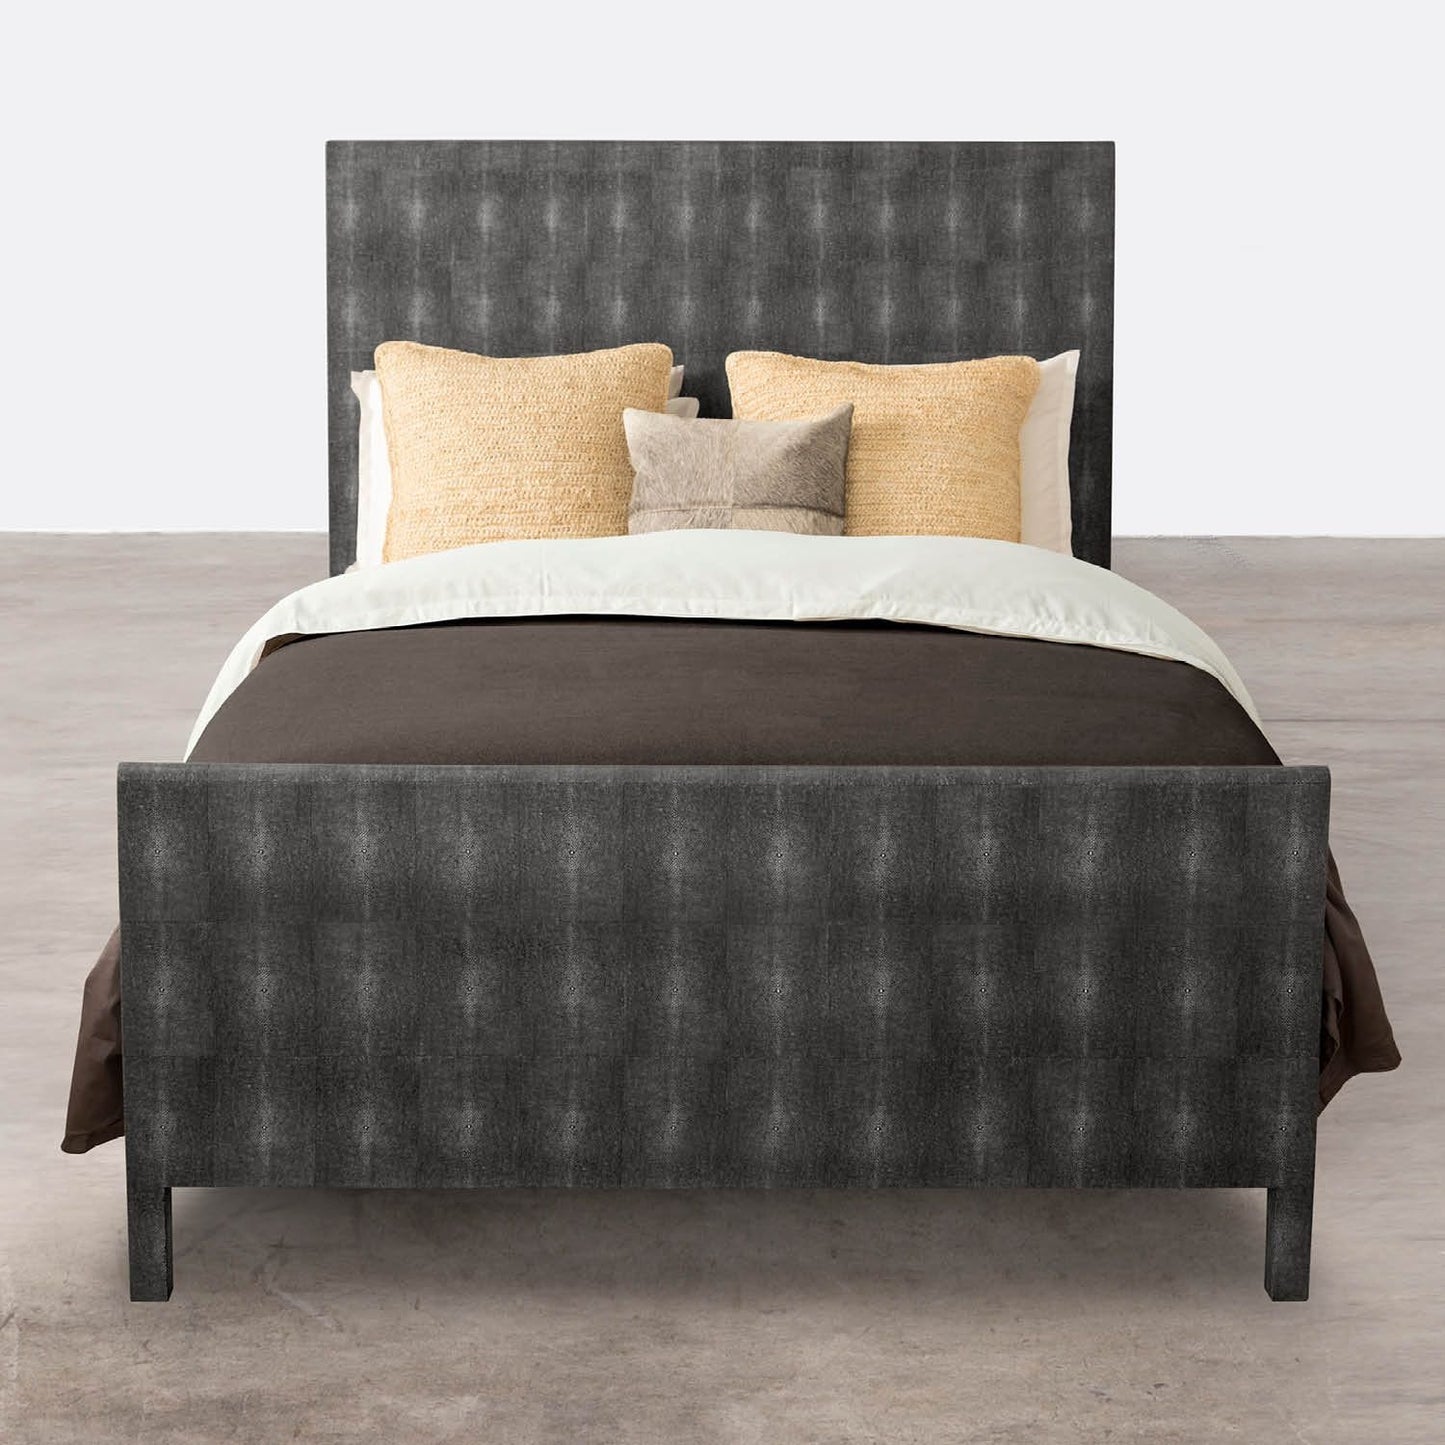 Sloane Bed Cool Gray Faux Shagreen - multiple options